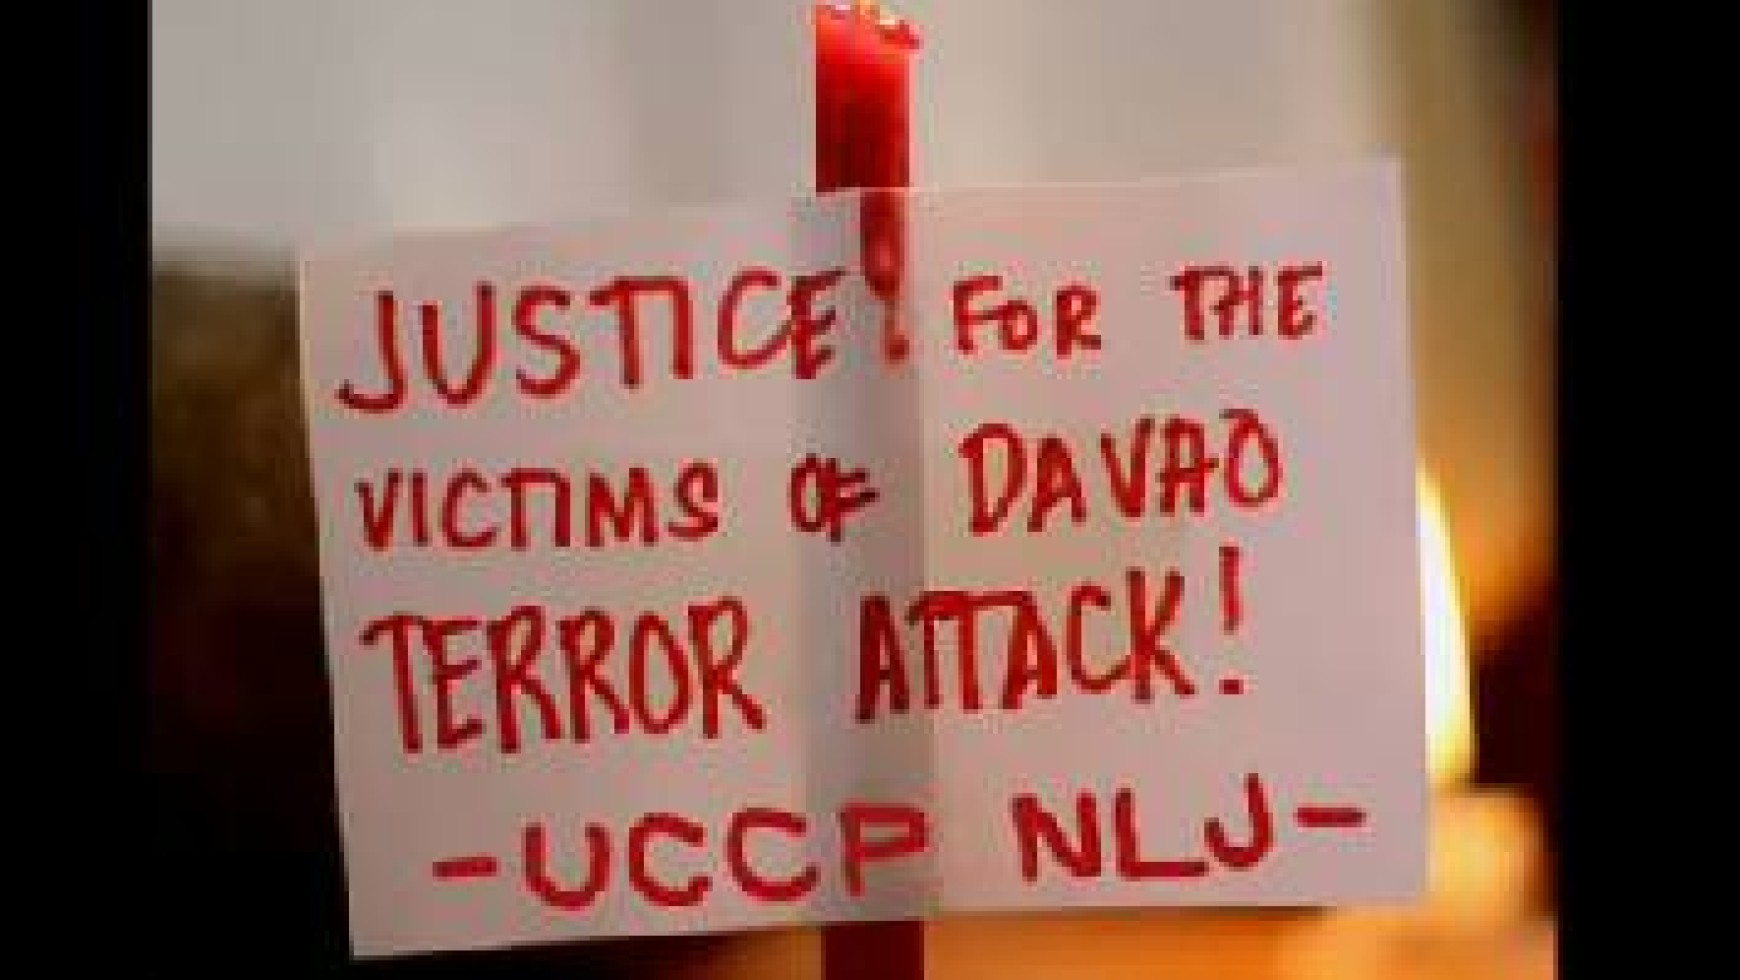 STATEMENT OF THE UCCP-NORTH LUZON JURISDICTION ON DAVAO CITY BOMBING